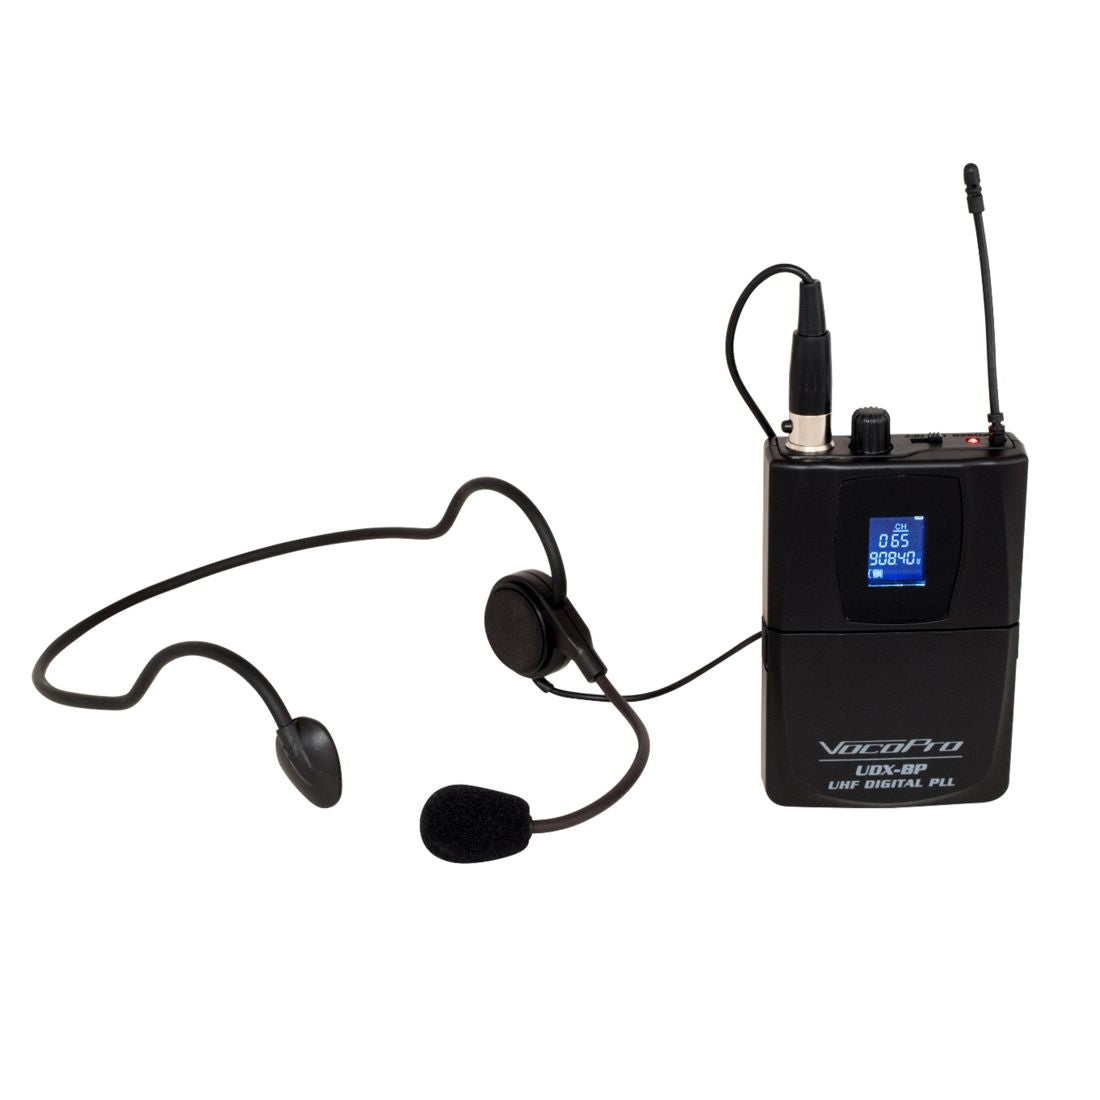 VOCOPRO | UDX-BP - Professional Digital PLL Wireless Bodypack Transmitter with Headset Microphone